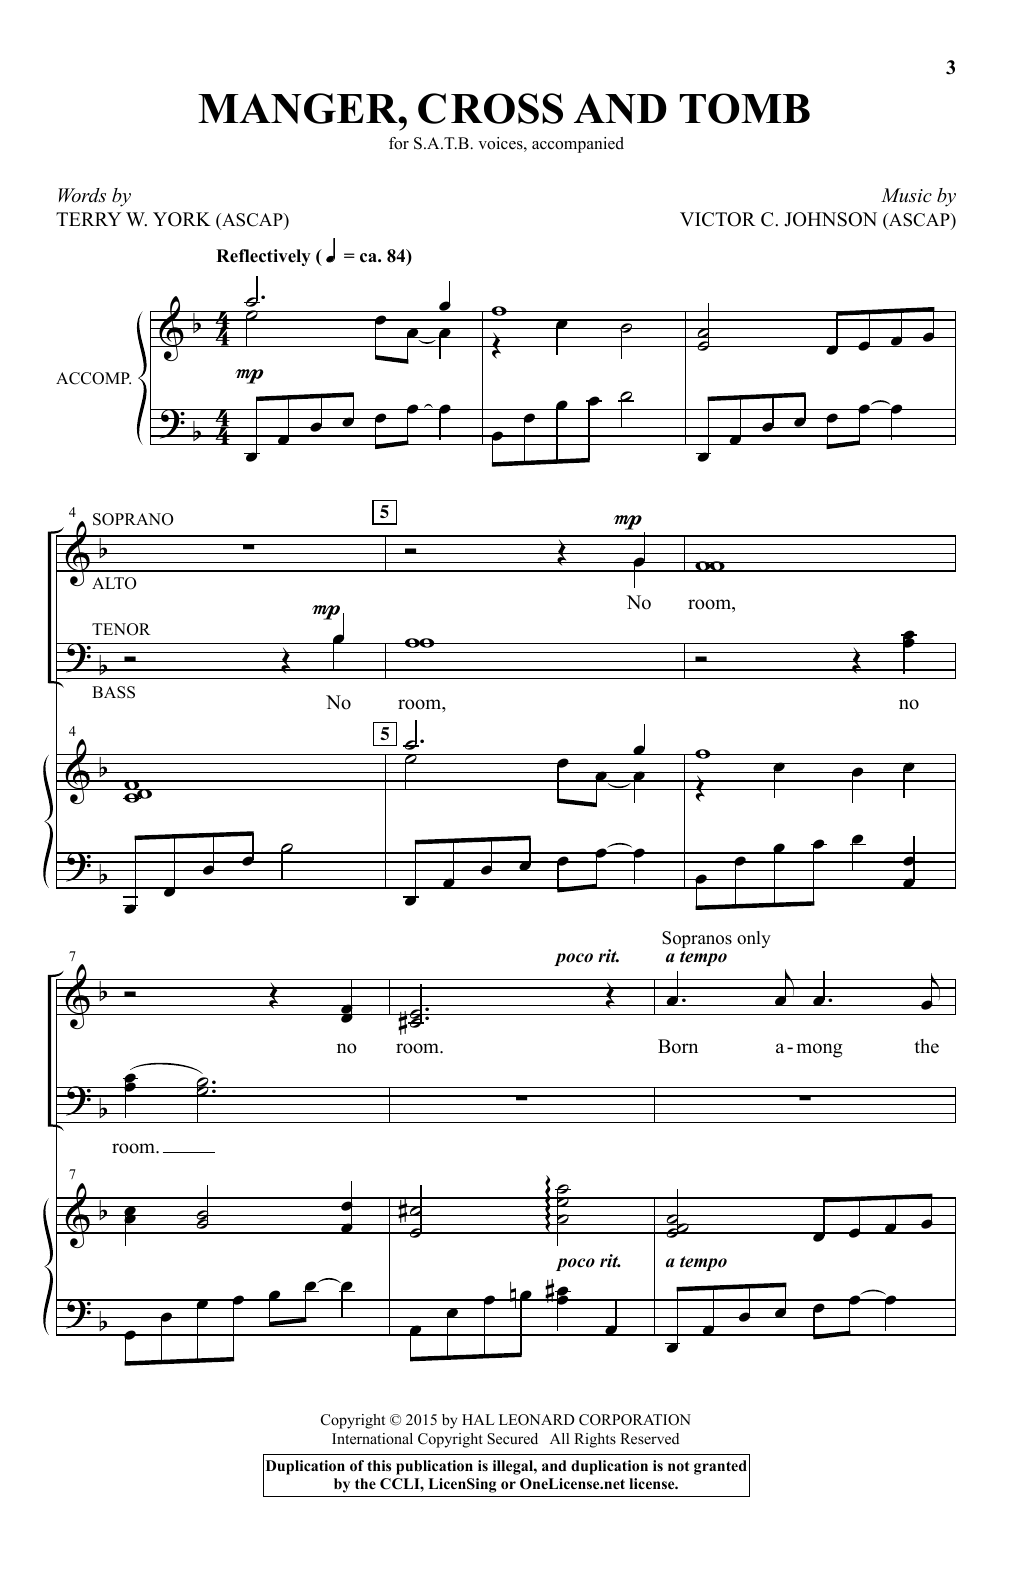 Download Victor C. Johnson Manger, Cross And Tomb Sheet Music